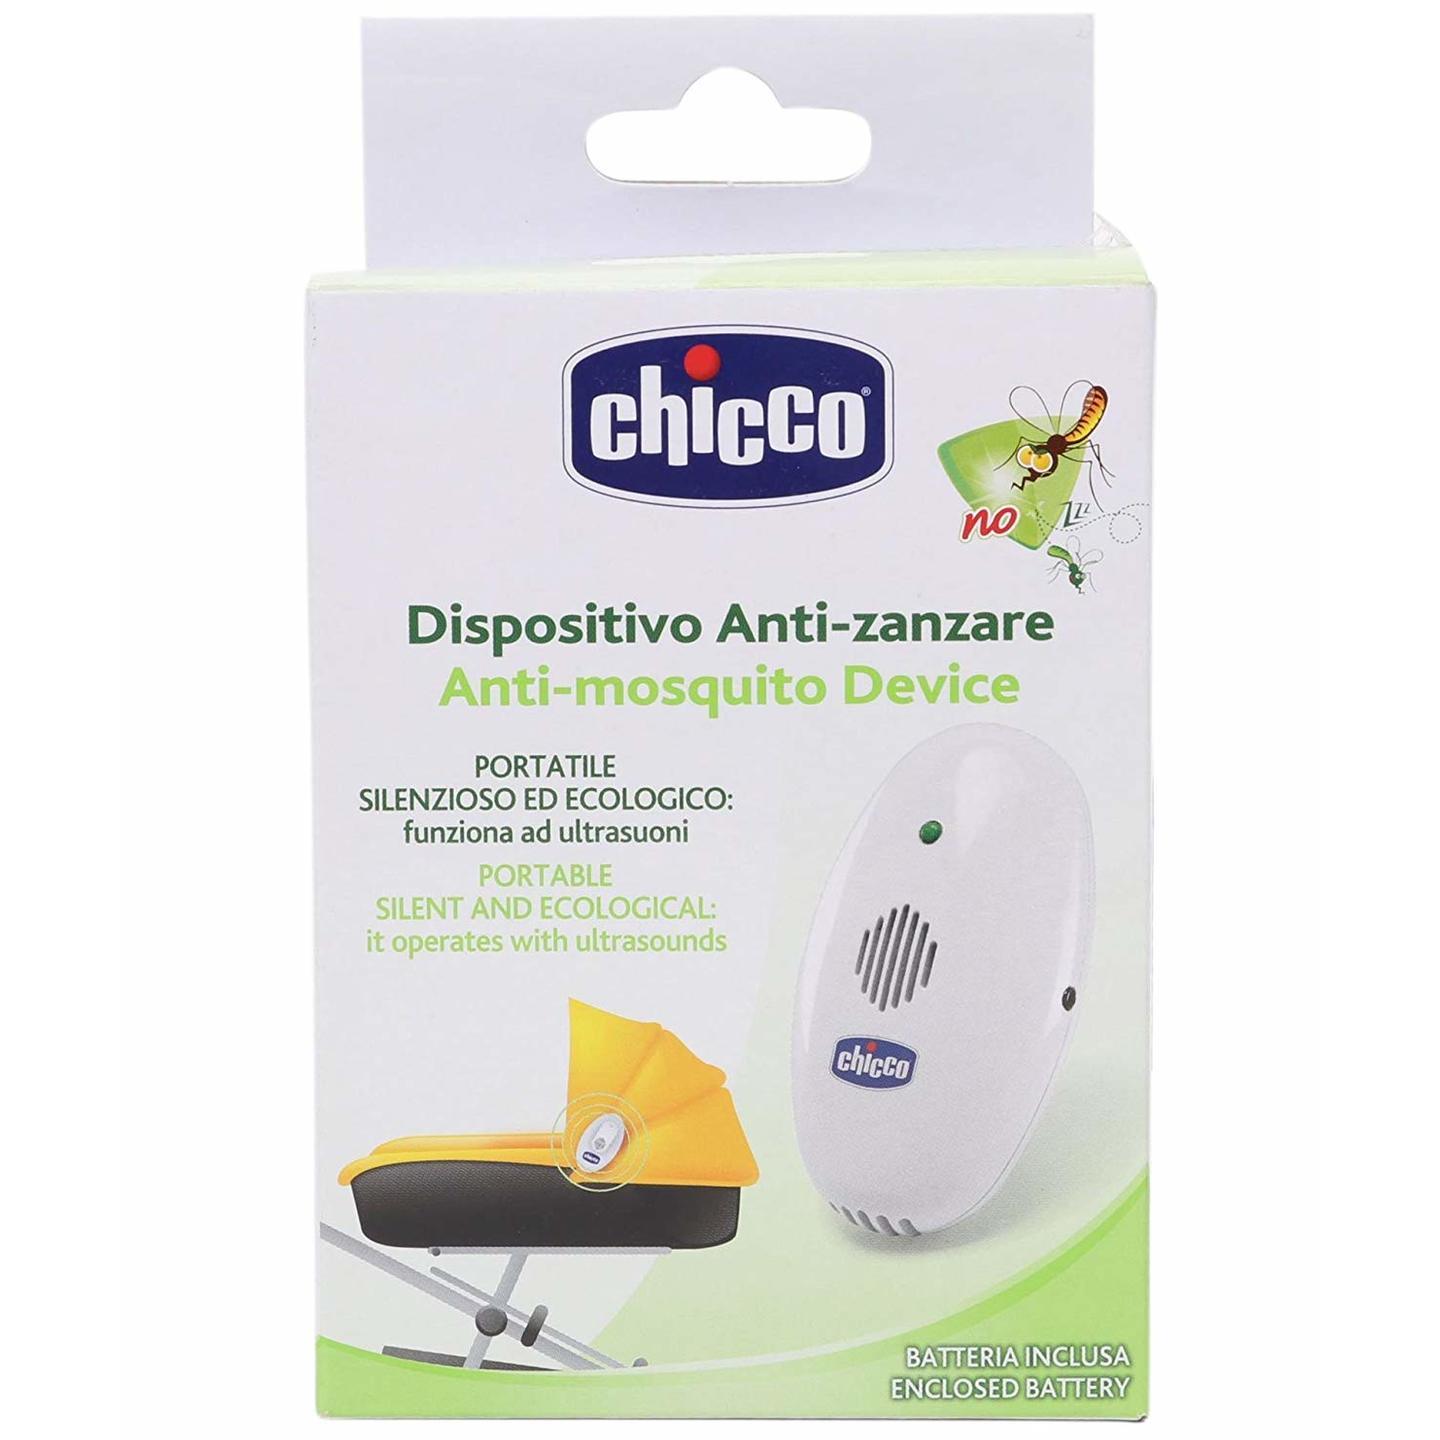 Chicco Ultrasounds Anti-Mosquito Portable Device